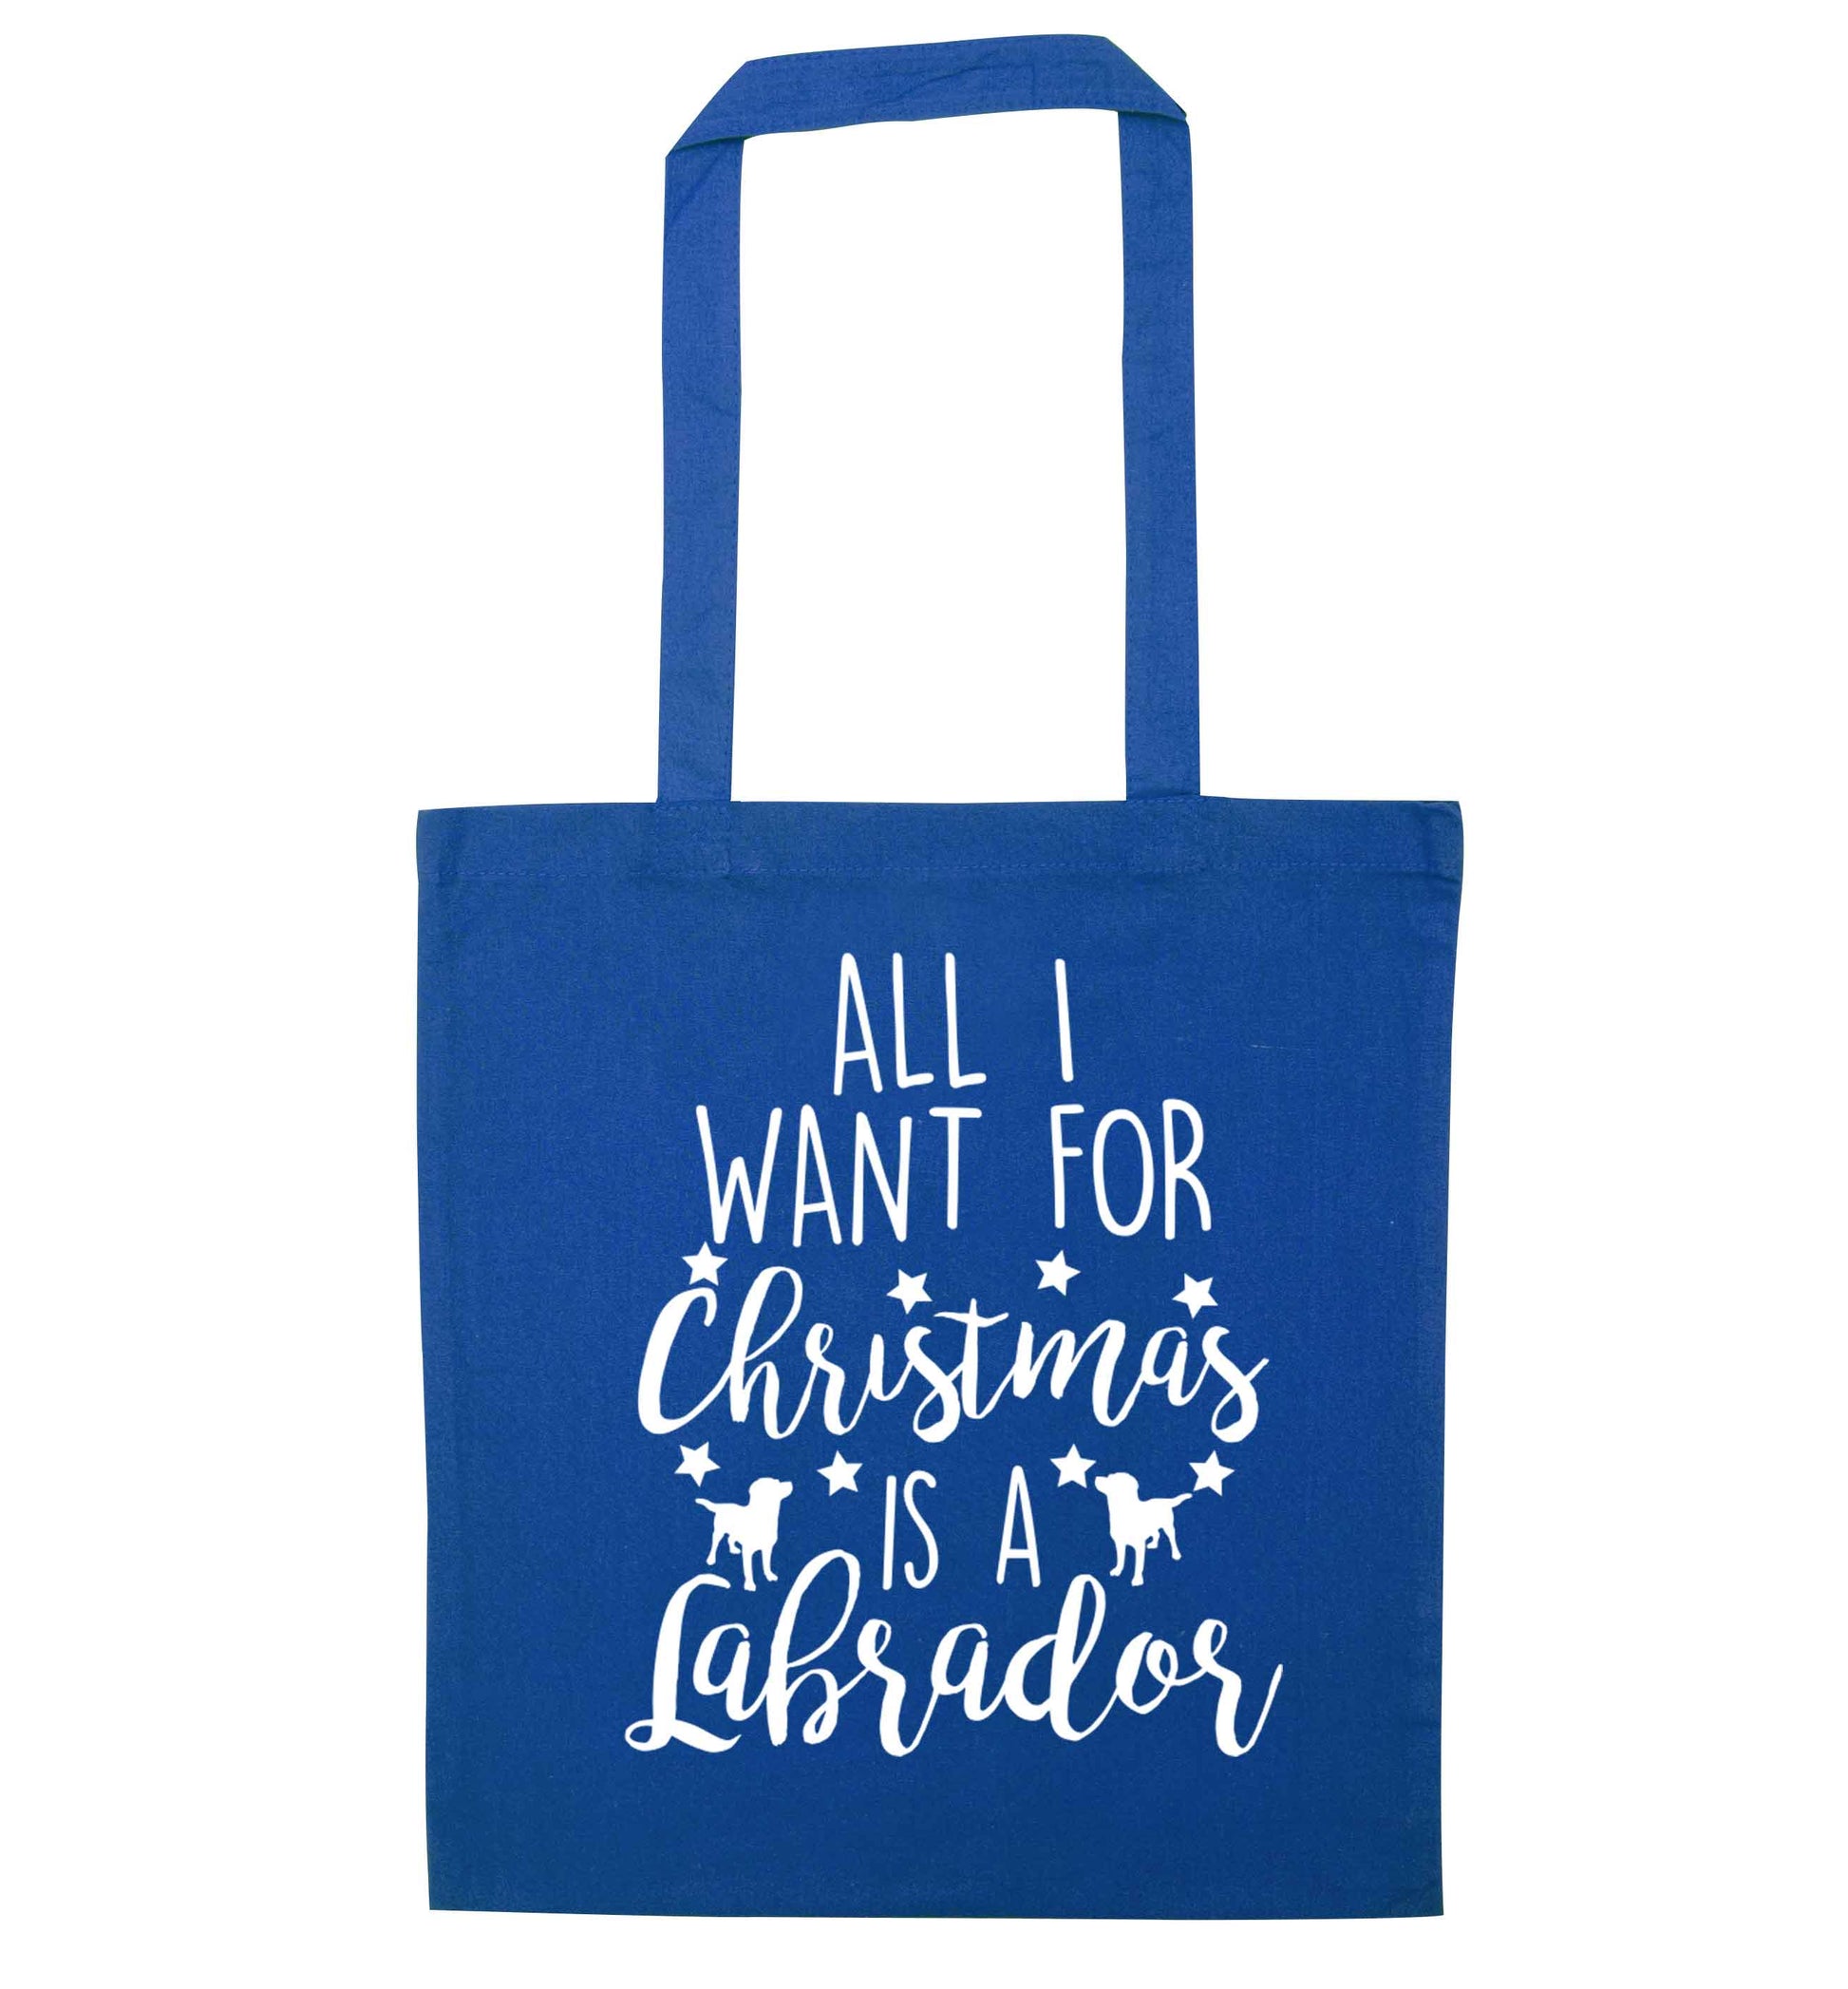 All I want for Christmas is a labrador blue tote bag